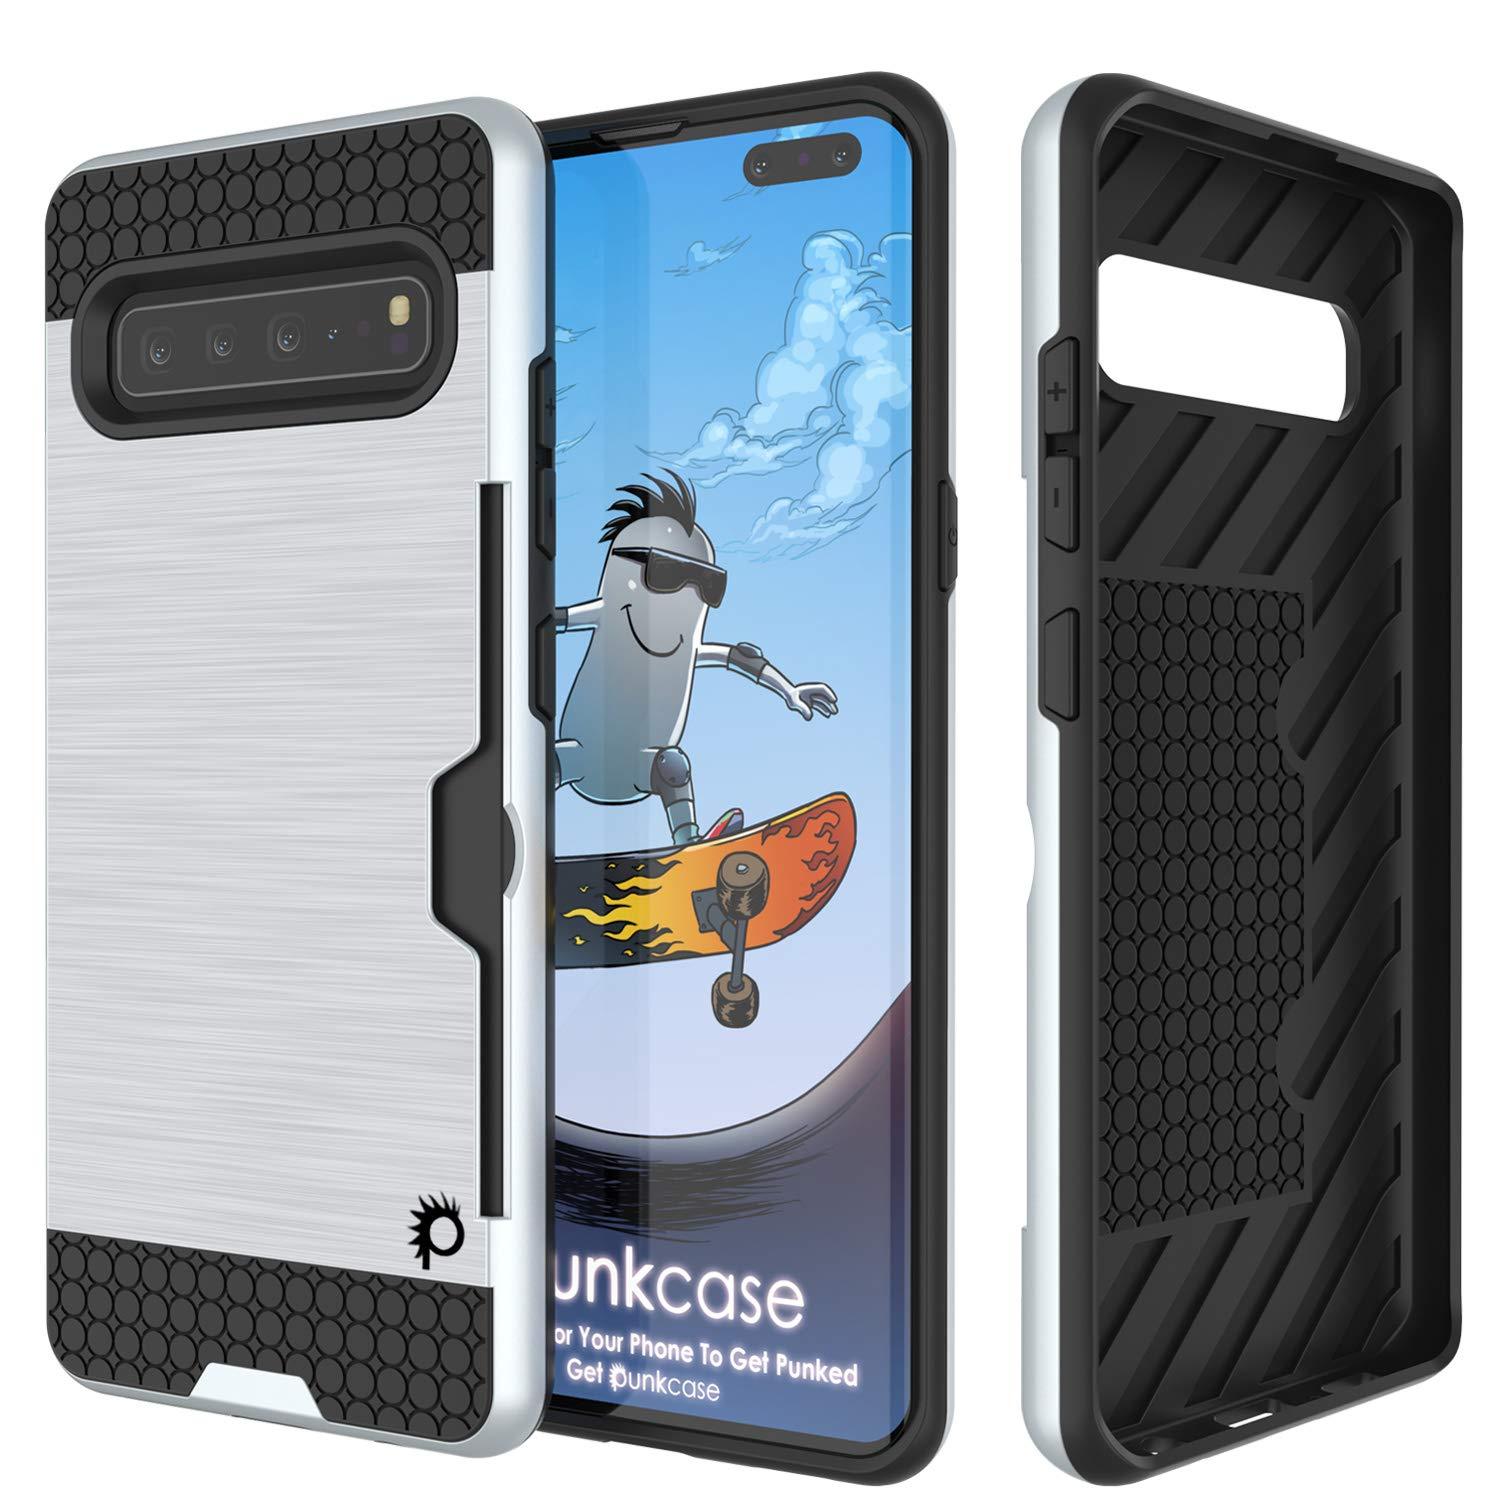 Galaxy S10 5G  Case, PUNKcase [SLOT Series] [Slim Fit] Dual-Layer Armor Cover w/Integrated Anti-Shock System, Credit Card Slot [White]